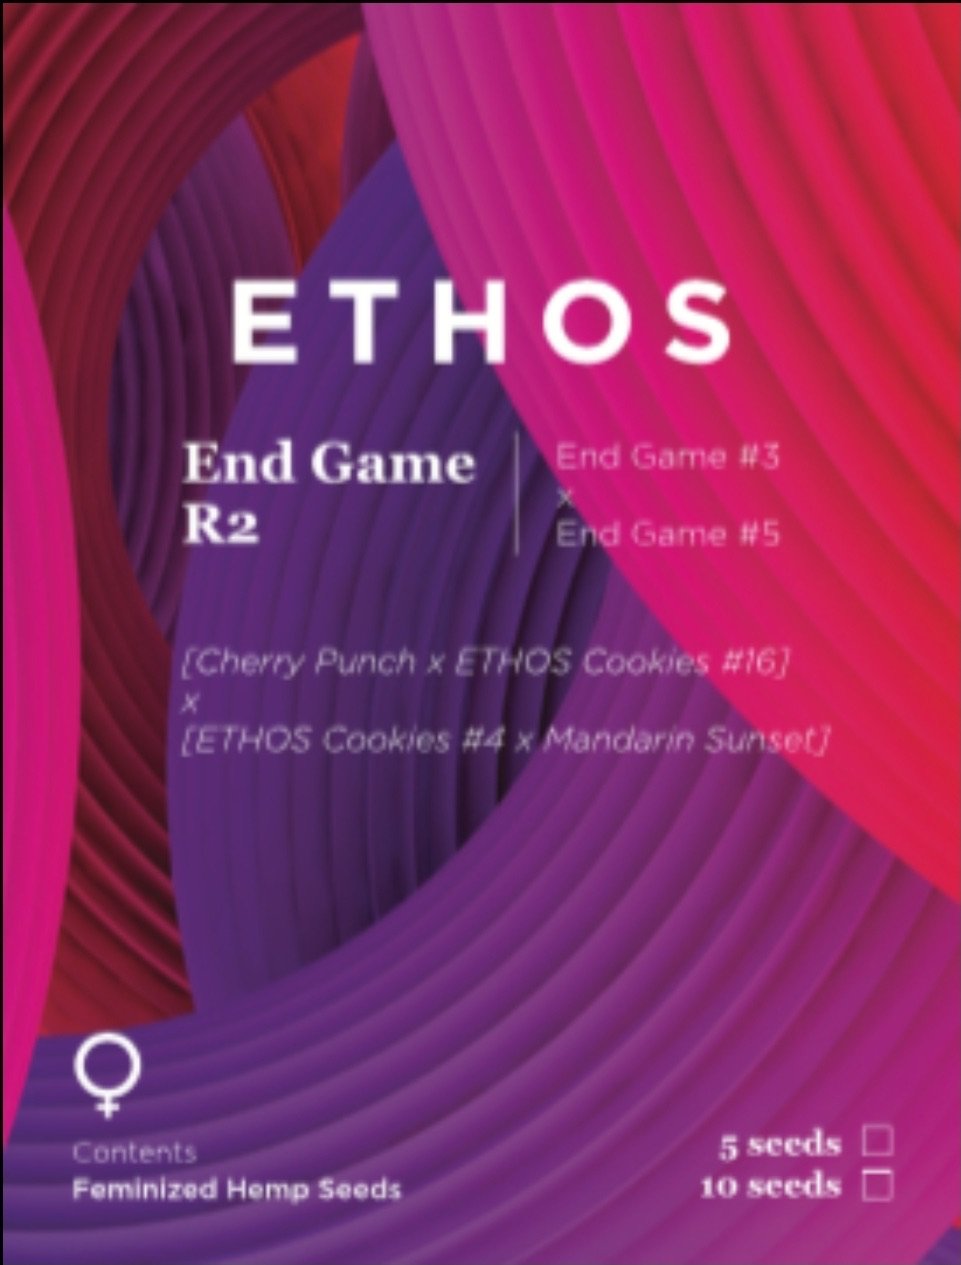 End Game R2 Strain Info / End Game R2 Weed By ETHOS Genetics